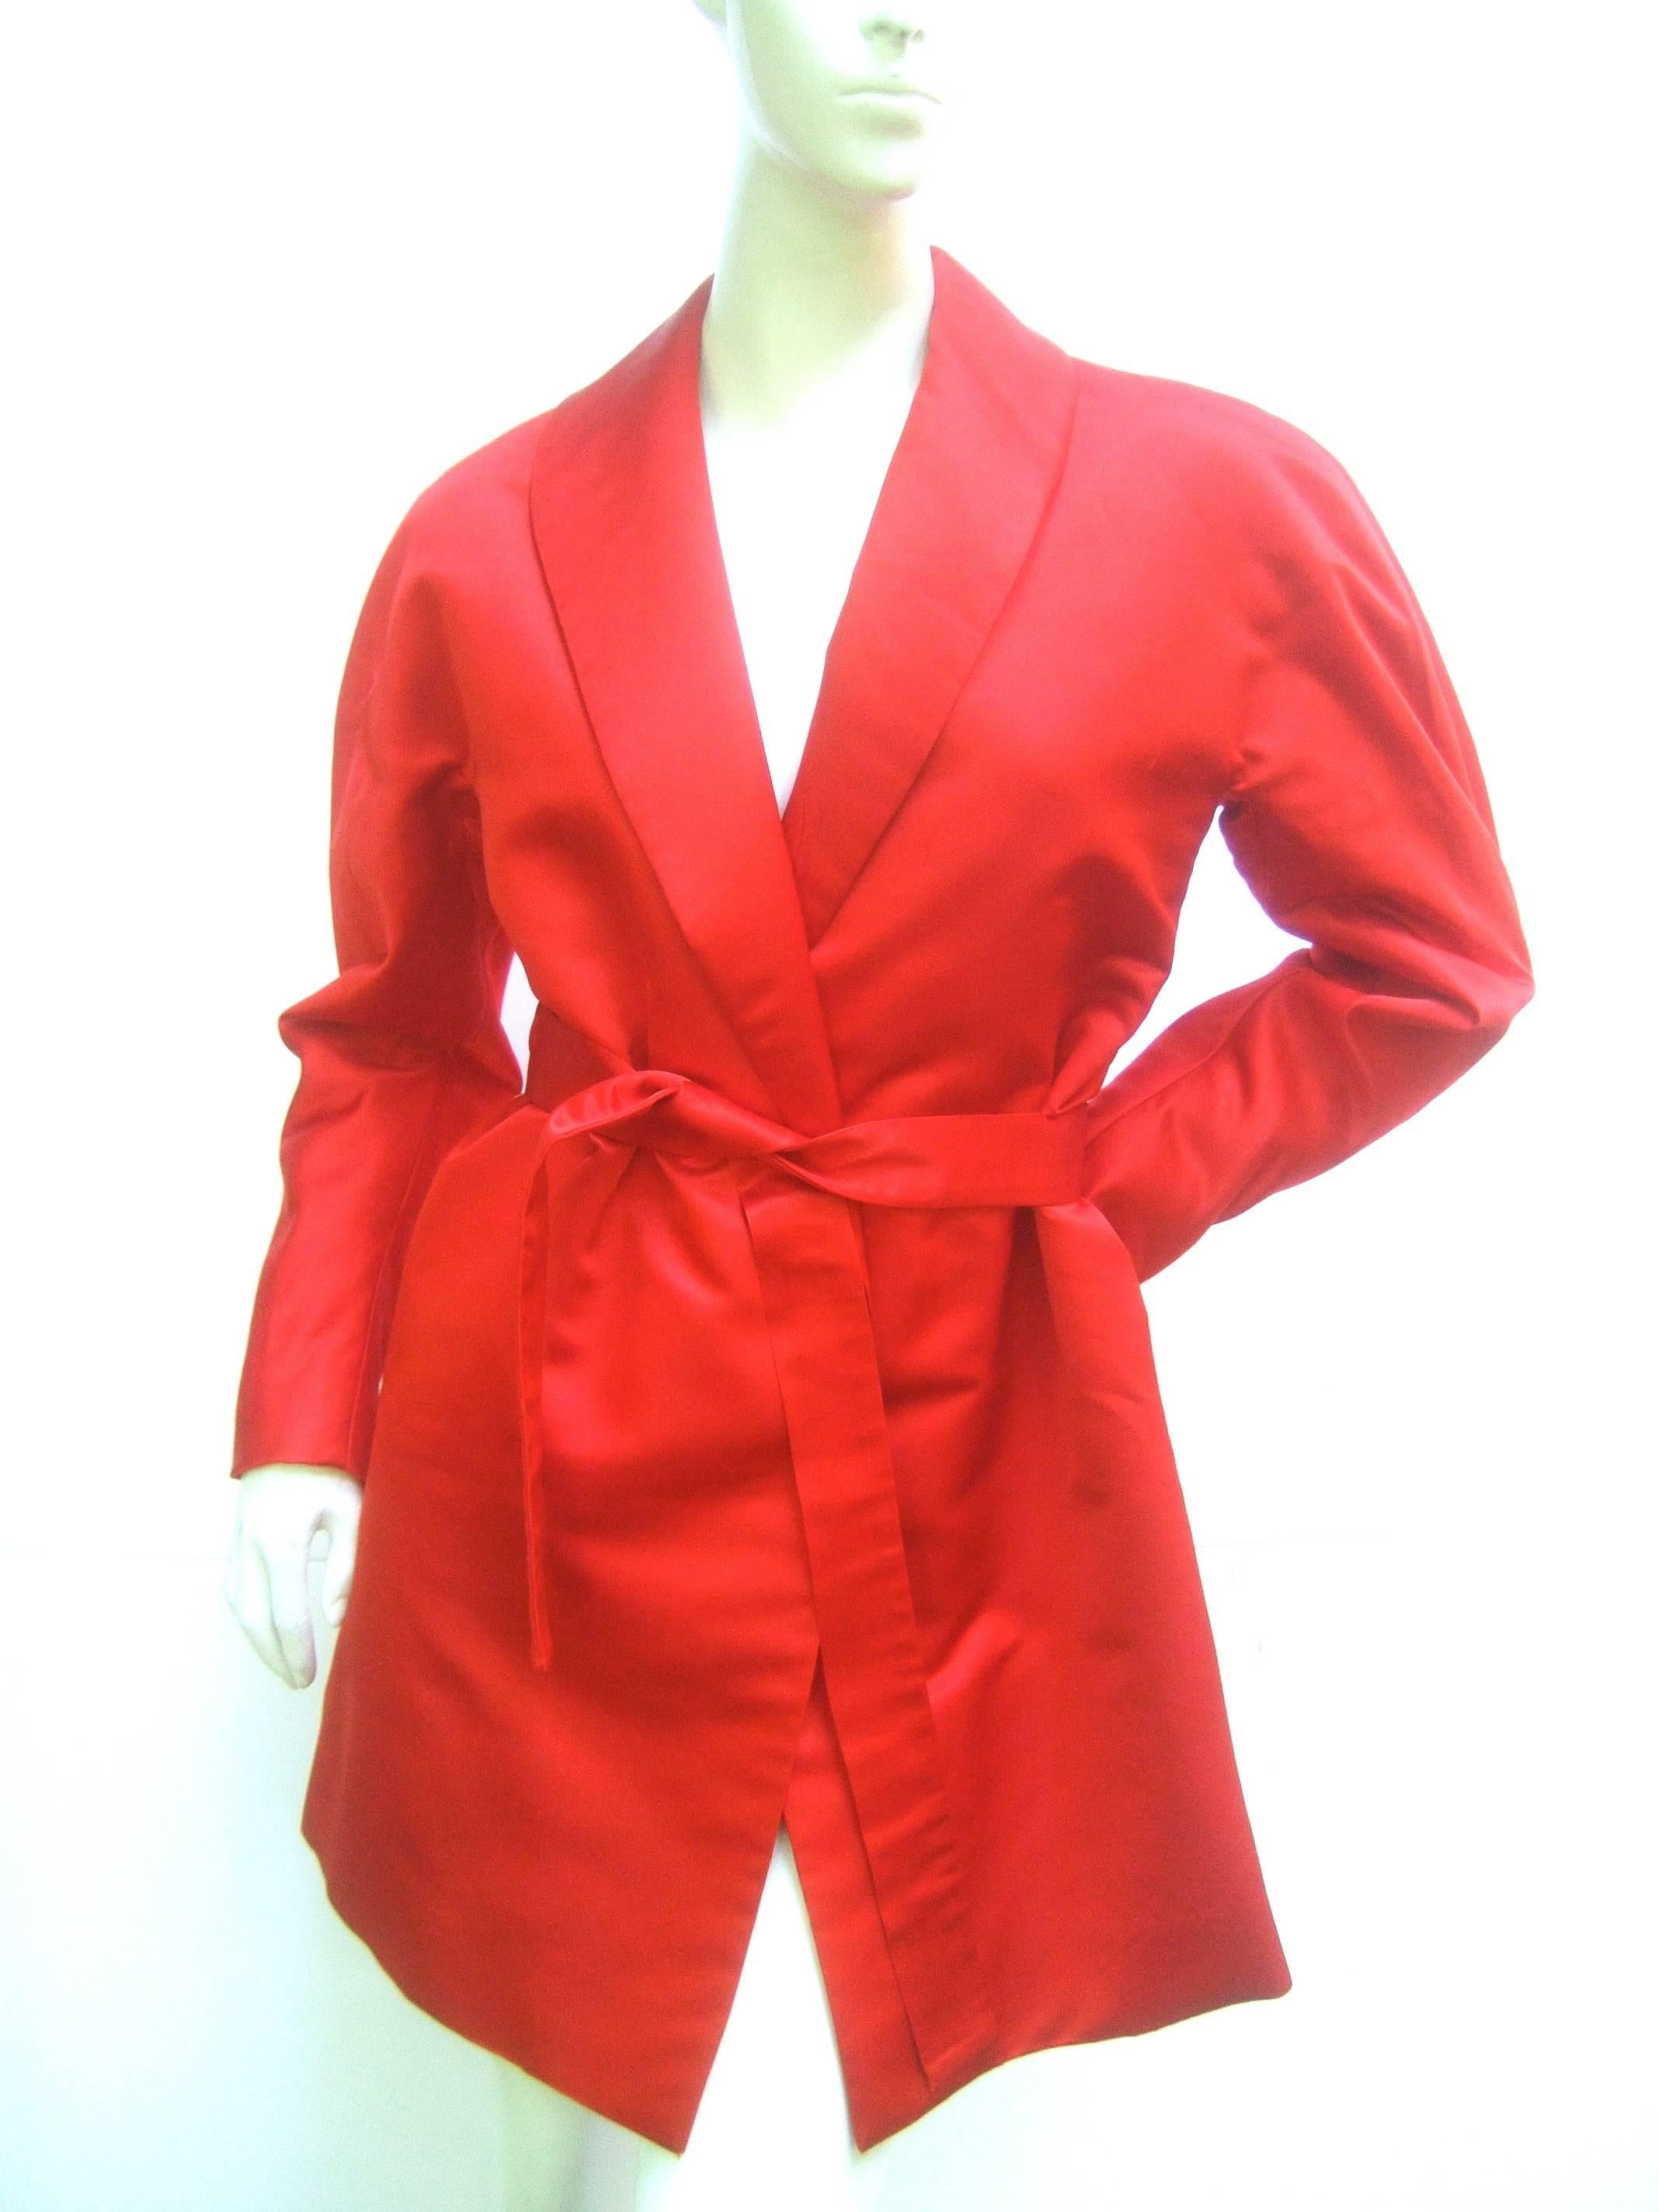 Cherry Red Halston Couture Belted Satin Jacket. 1970's. Studio 54. 2